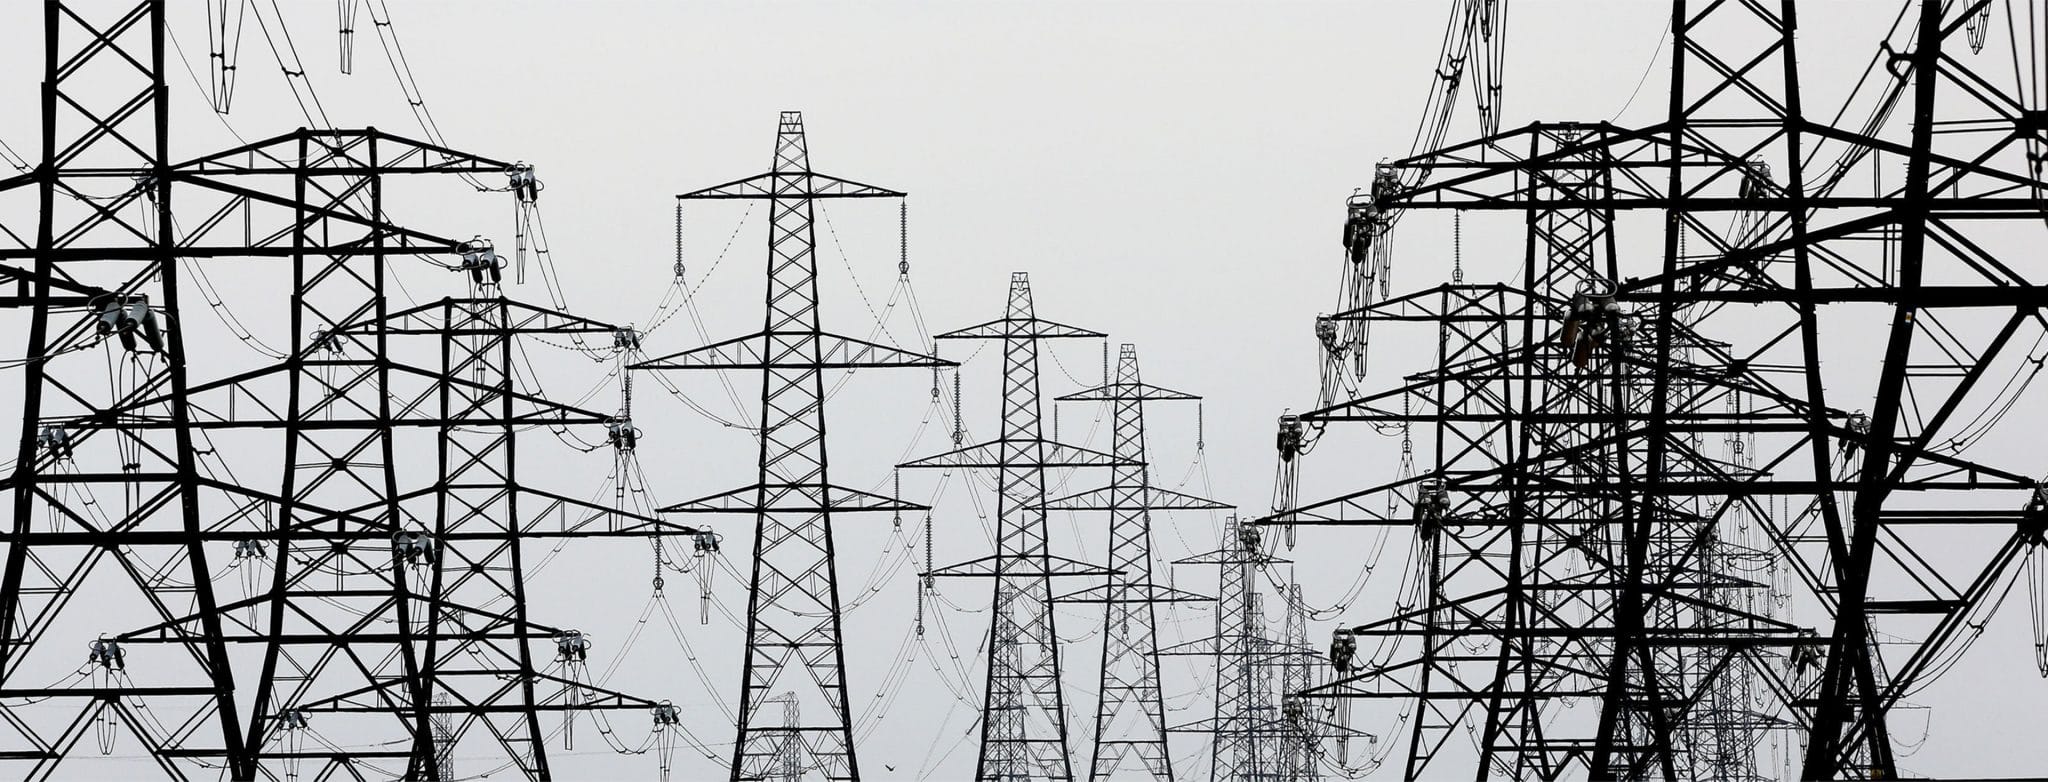 Nigerian govt caps power supply to four African countries at 6%